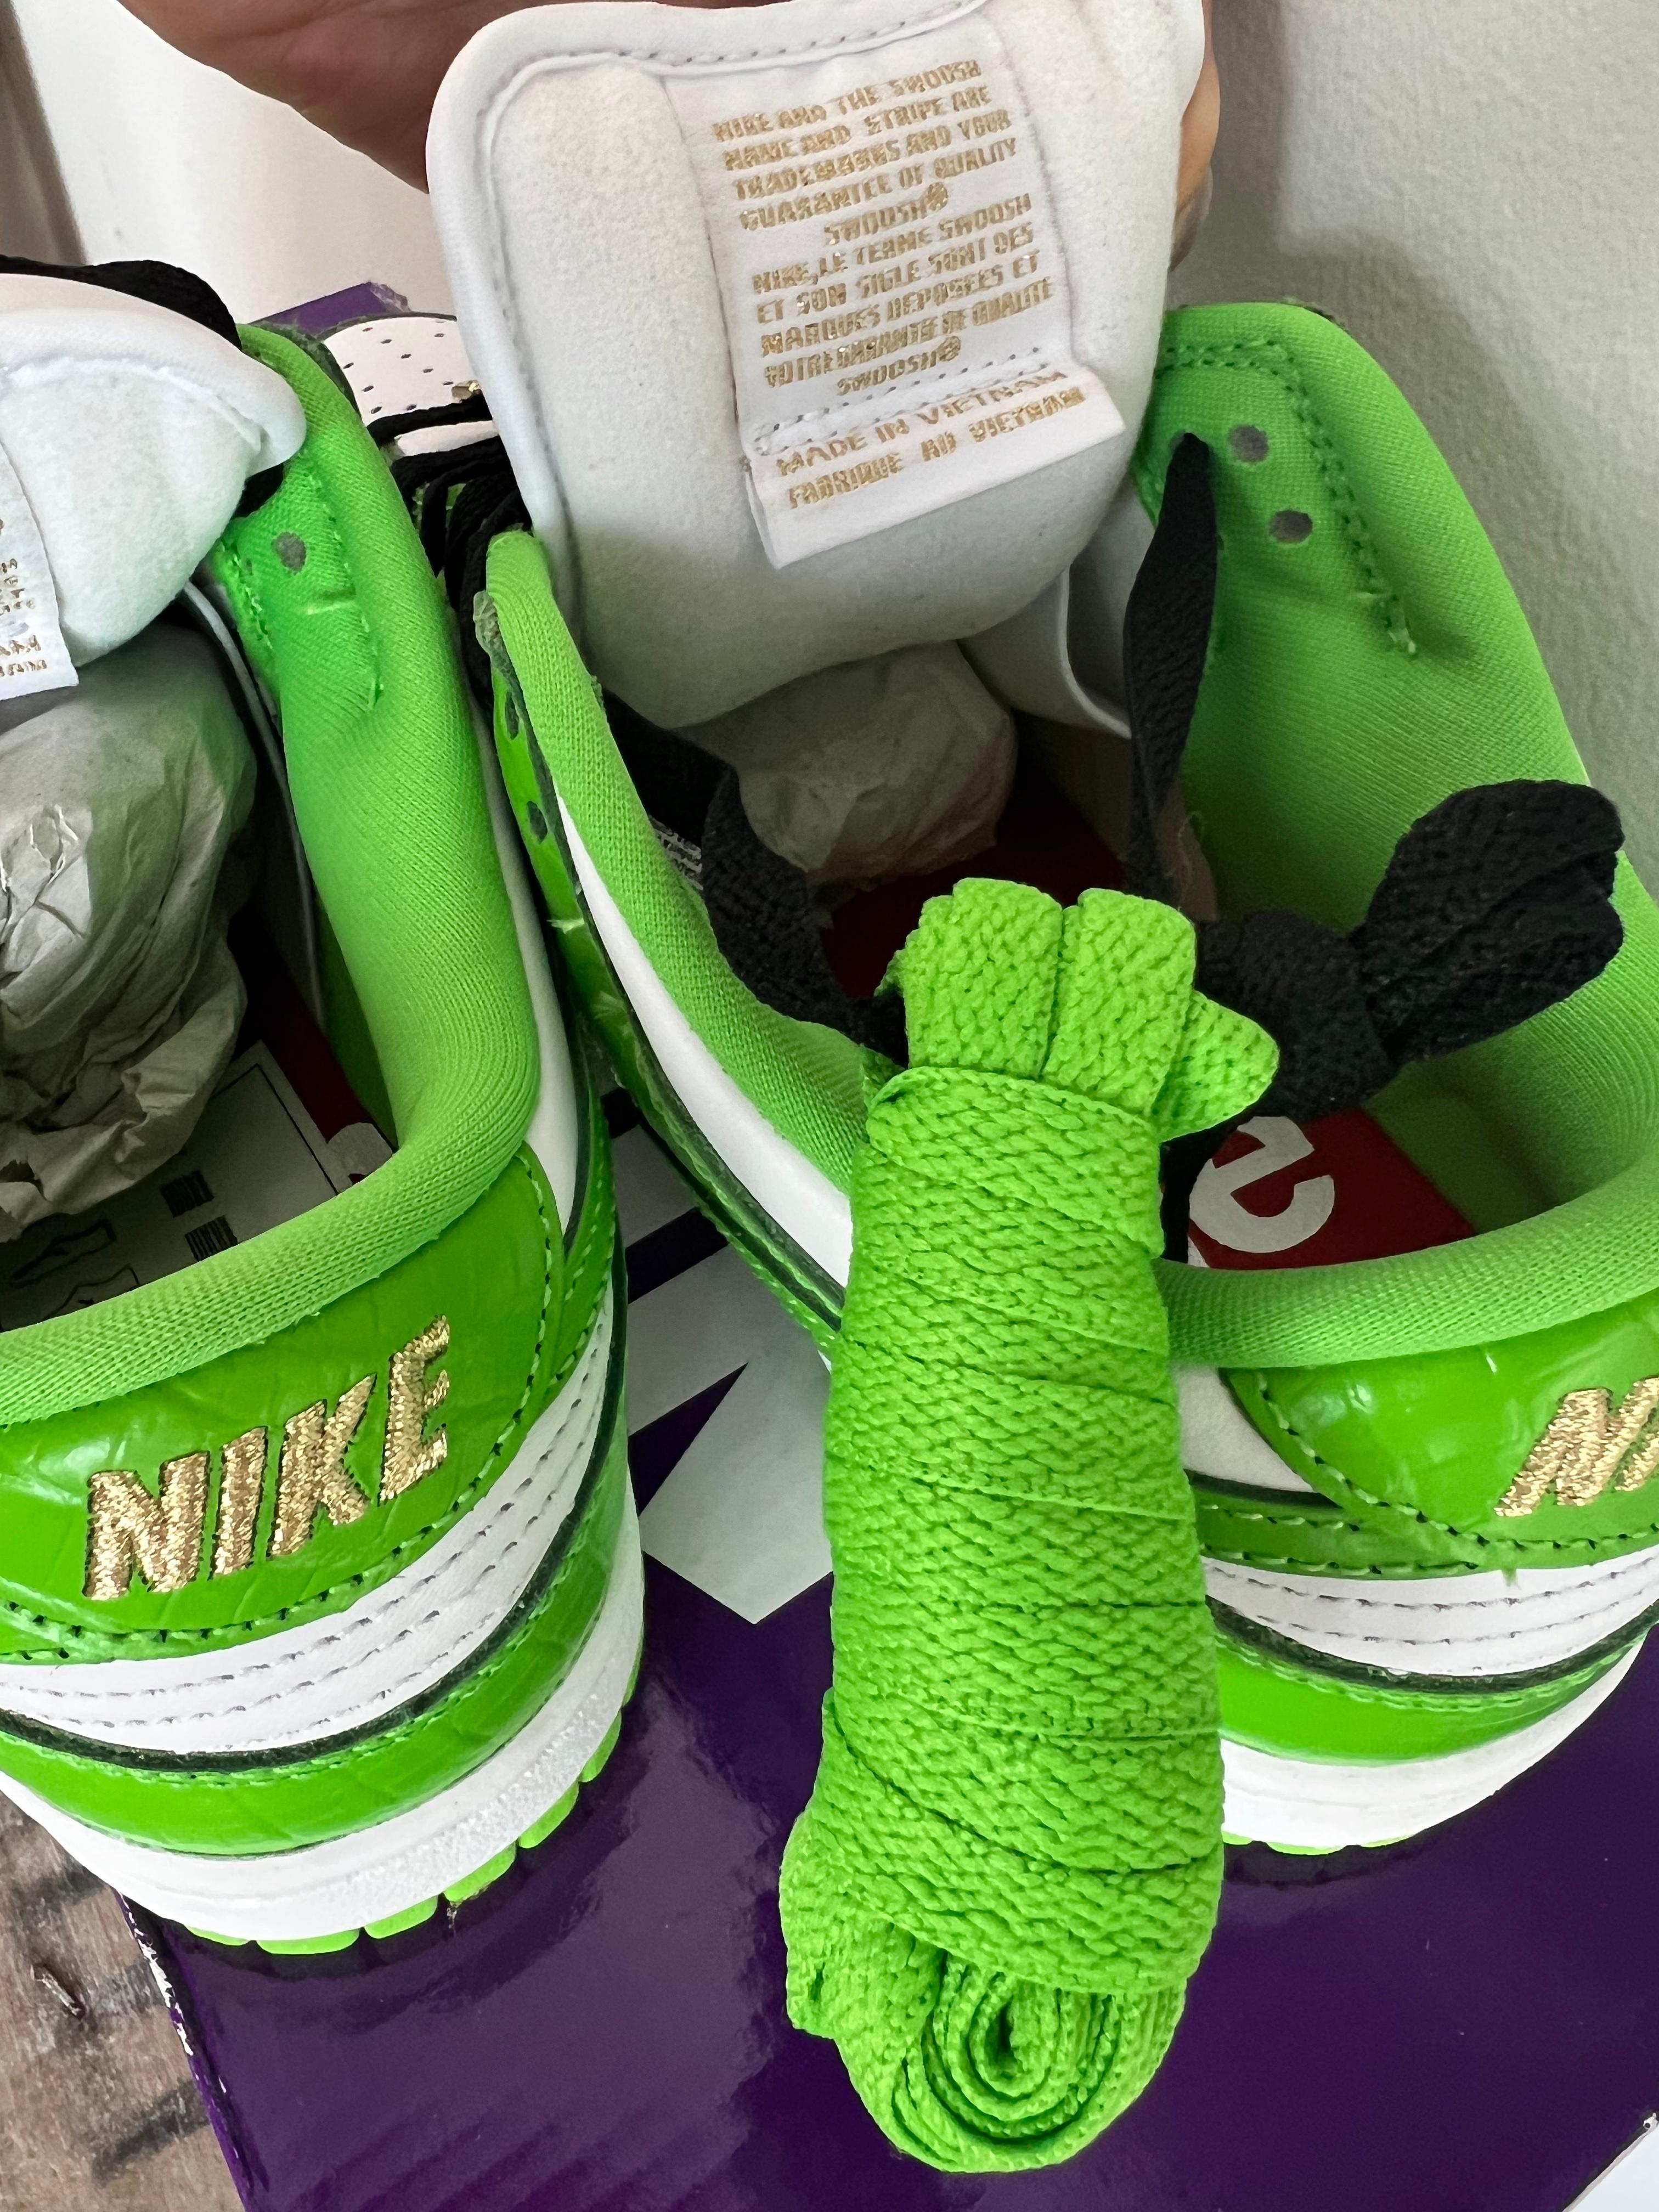 Supreme x Nike SB Green Star/Hype size US9.5 For Sale 2